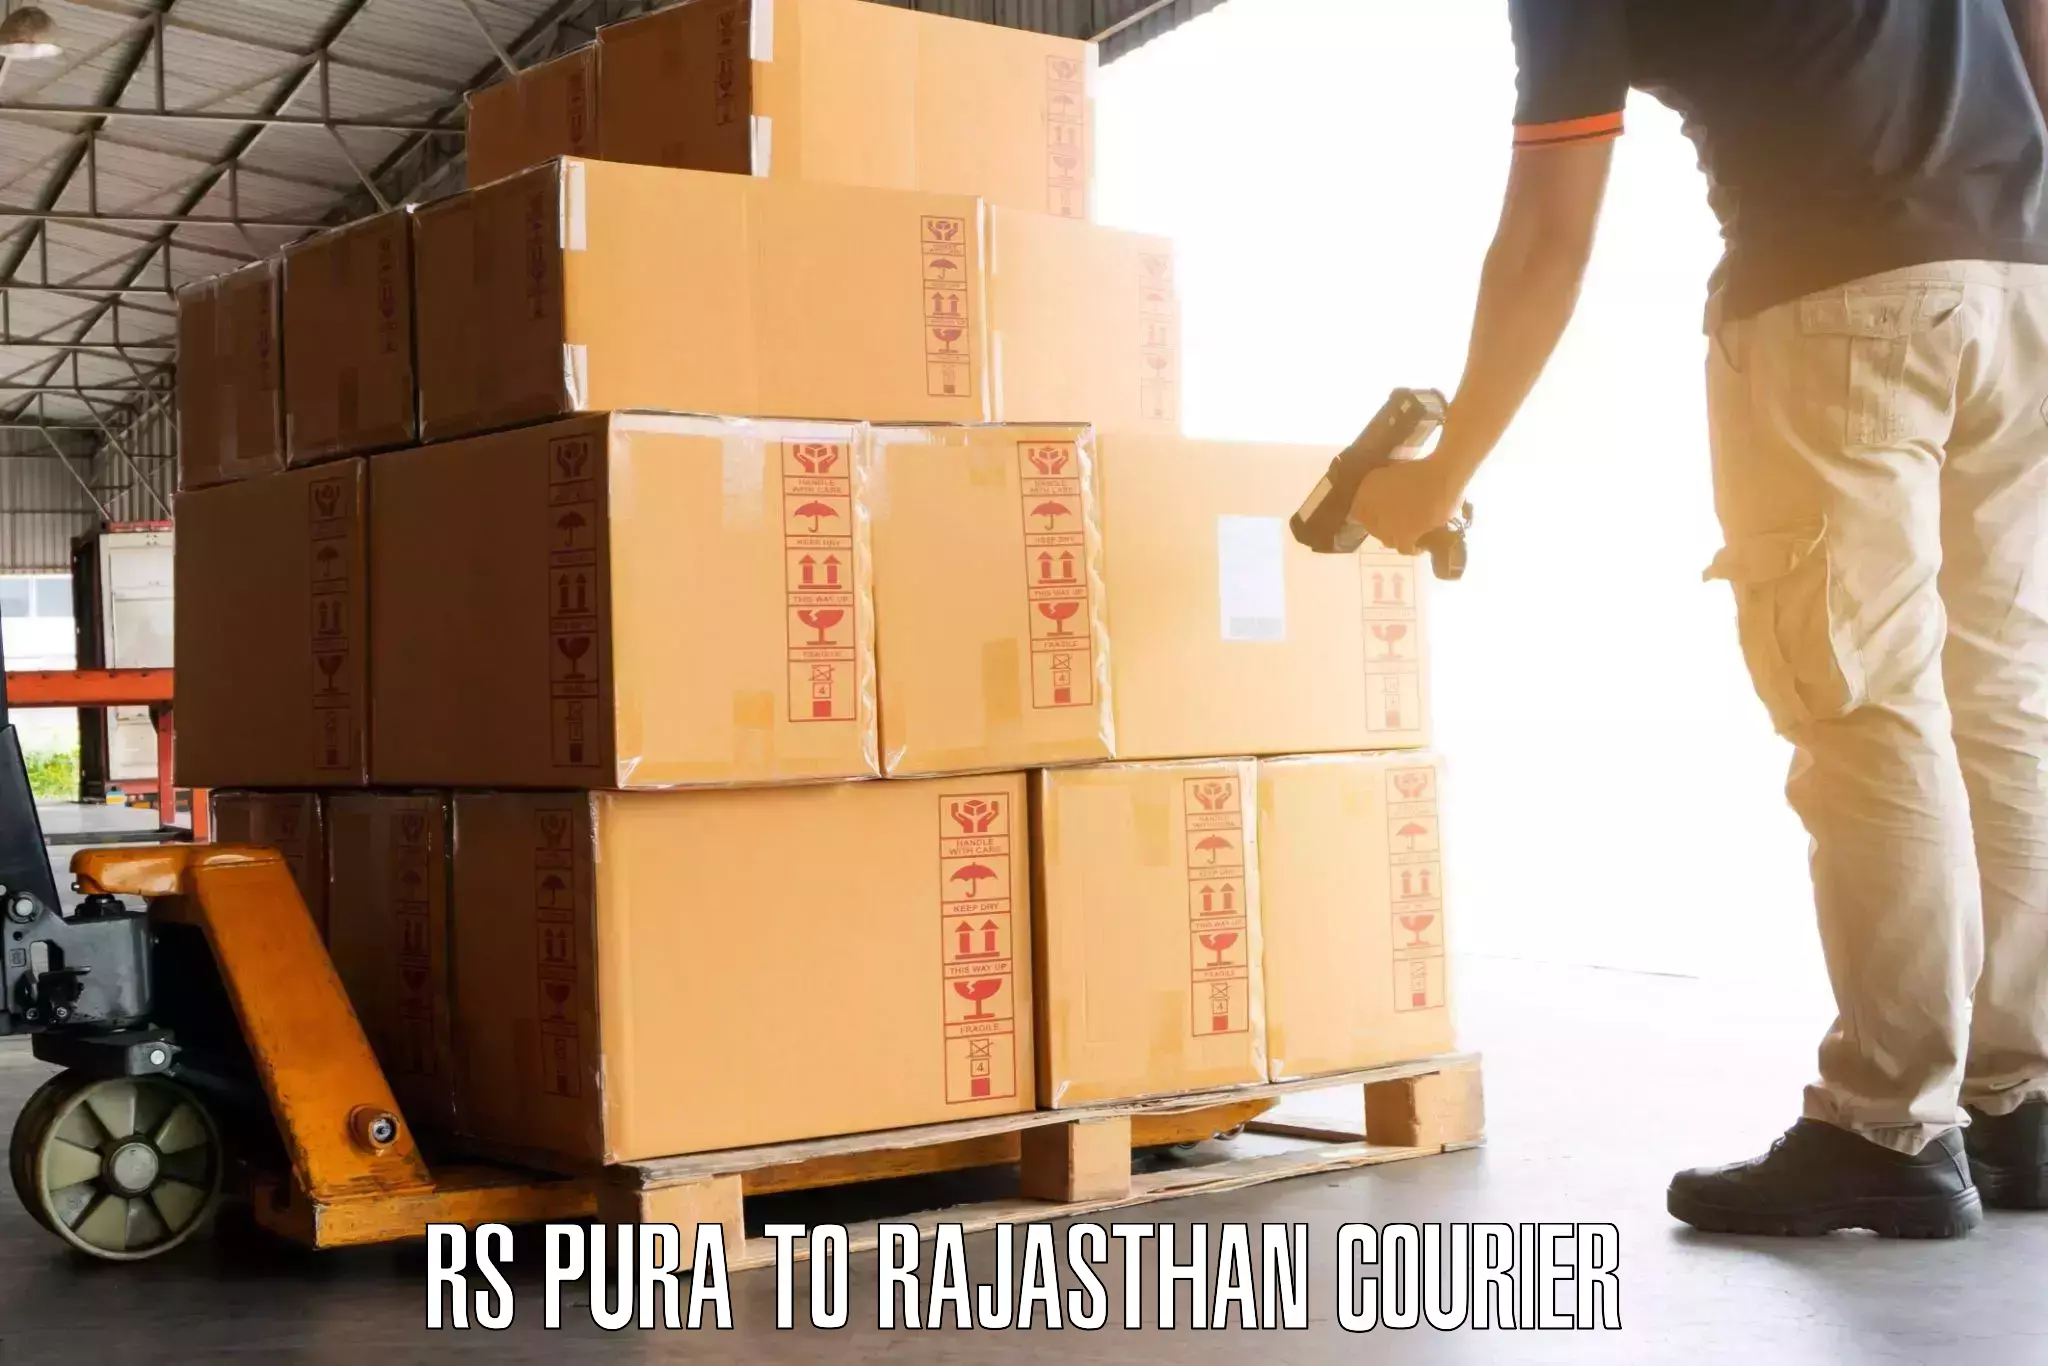 Luggage delivery app RS Pura to Fatehpur Sikar